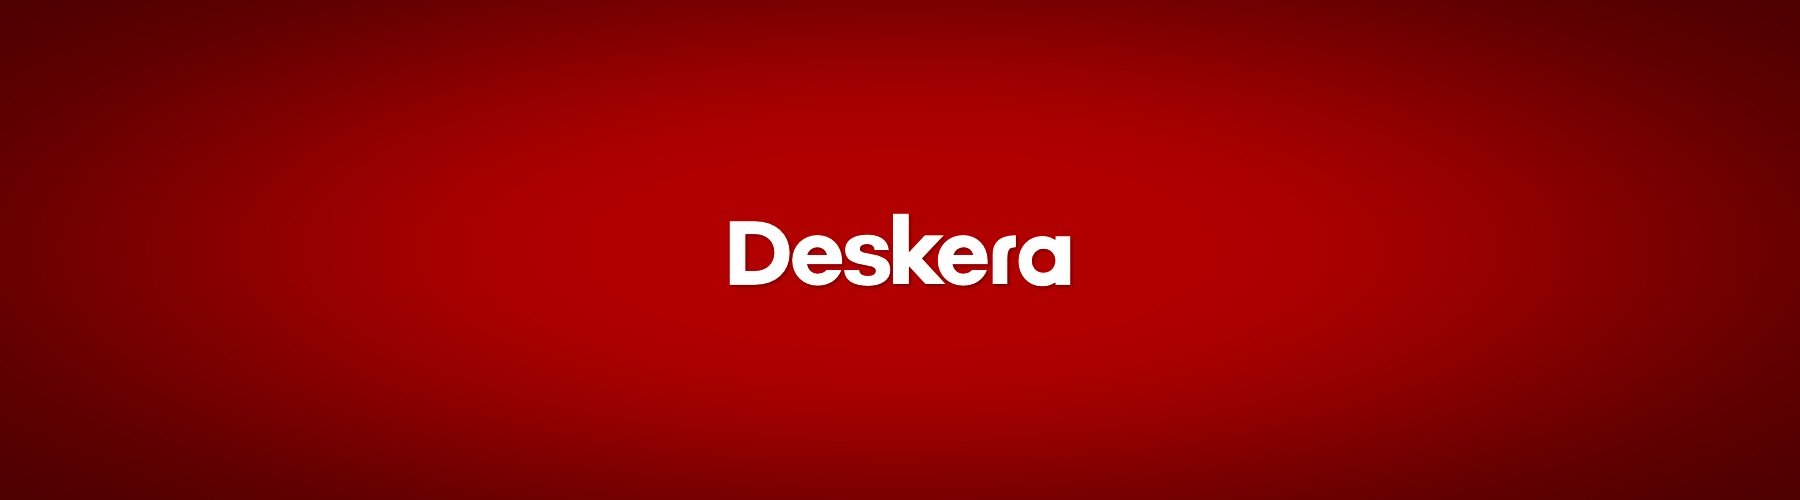 Discussion Forums and Messaging in Deskera Project Management